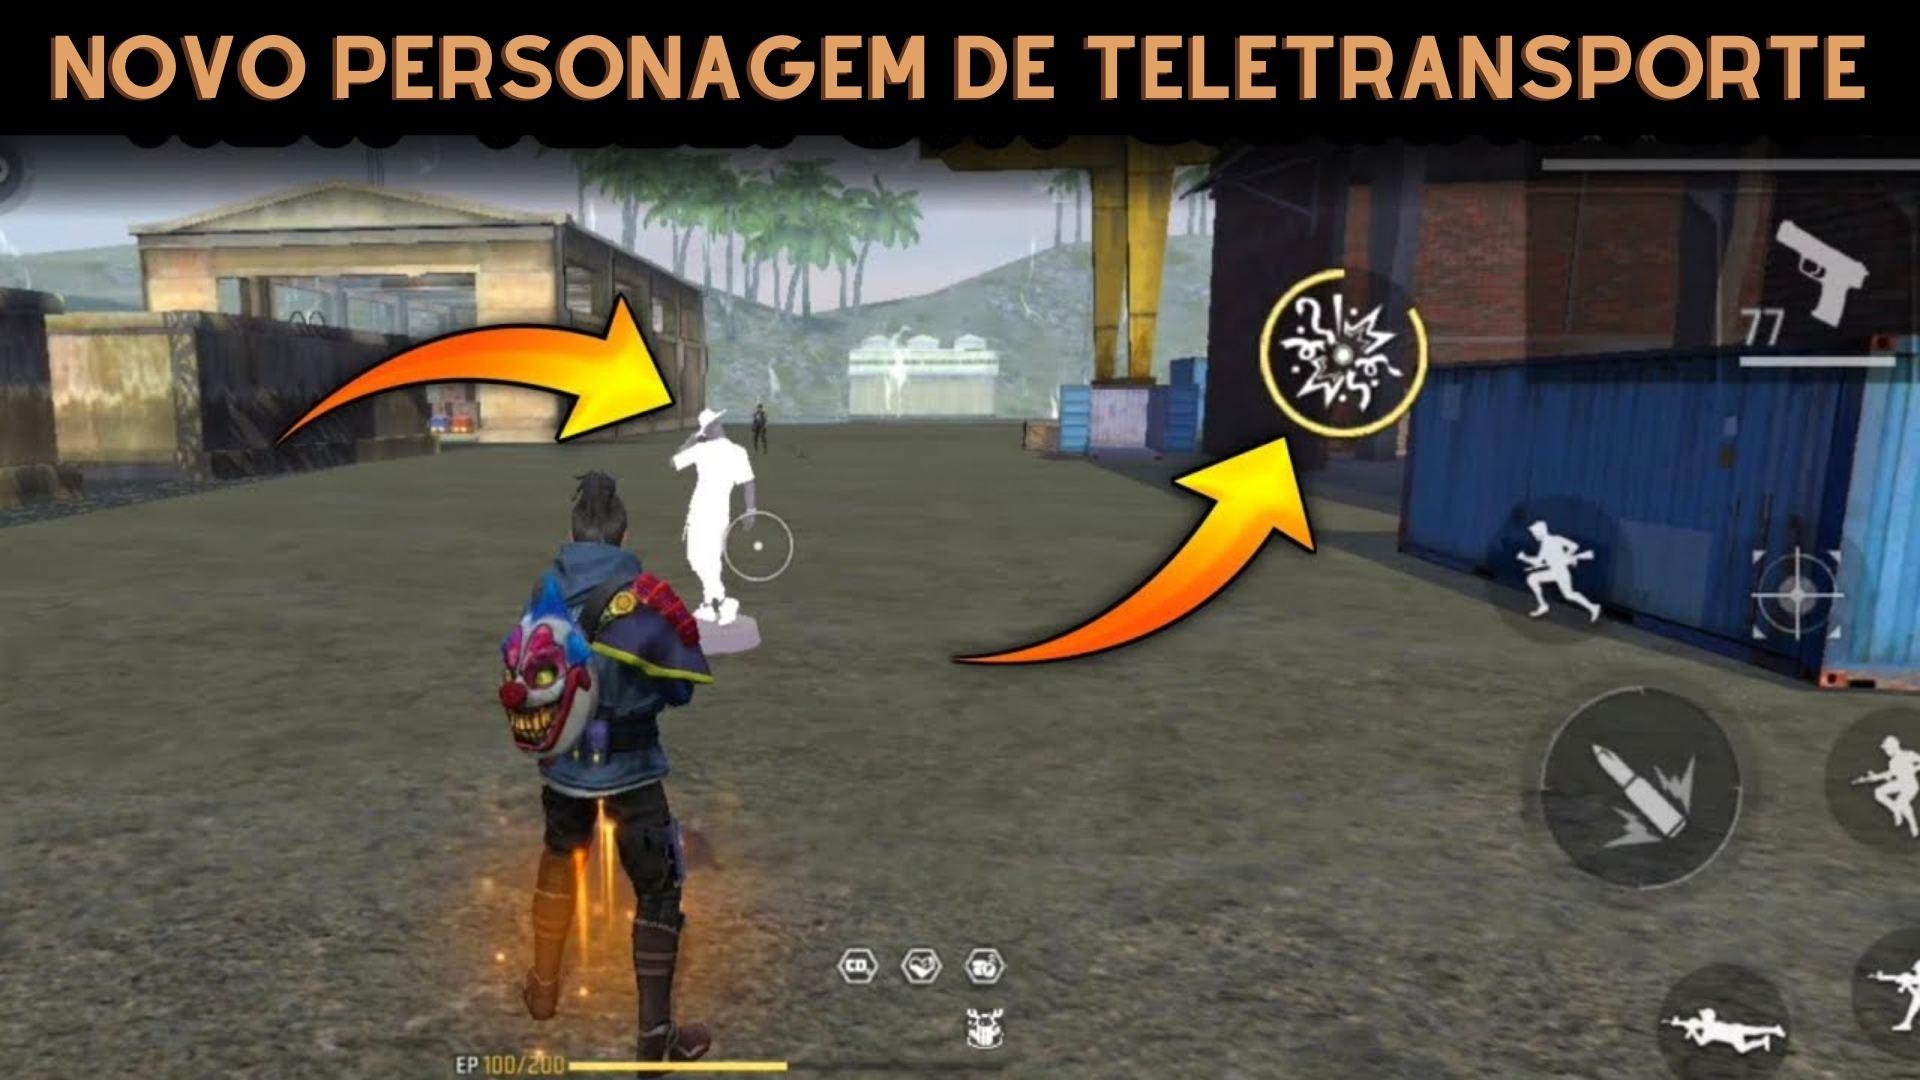 Free Fire receives new character with teleportation; see how it works